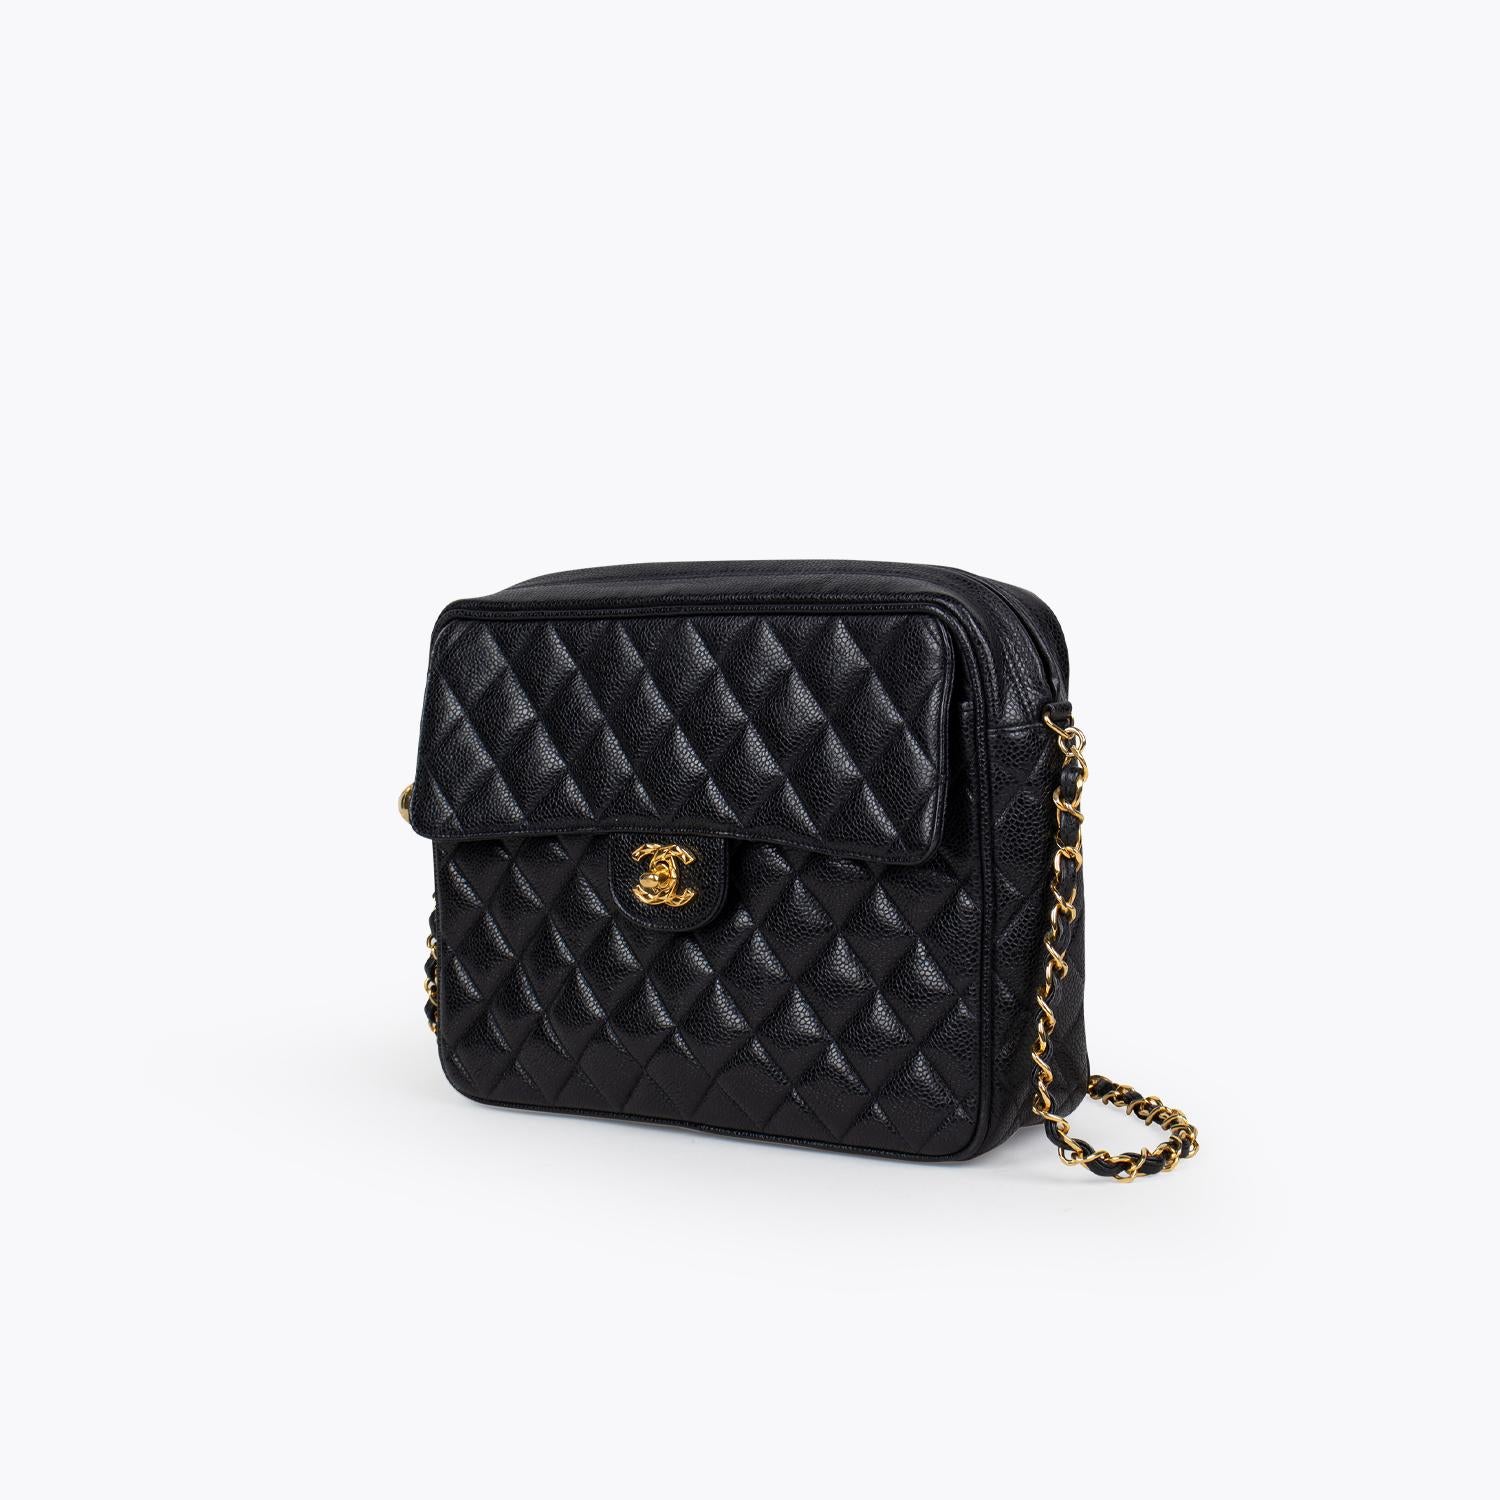 Black Caviar leather Chanel Camera crossbody bag with

- Gold-tone hardware
- Single chain-link shoulder strap
- Single exterior pocket at front featuring CC turn-lock closure
- Tonal leather lining, dual pockets at interior walls; one with zip